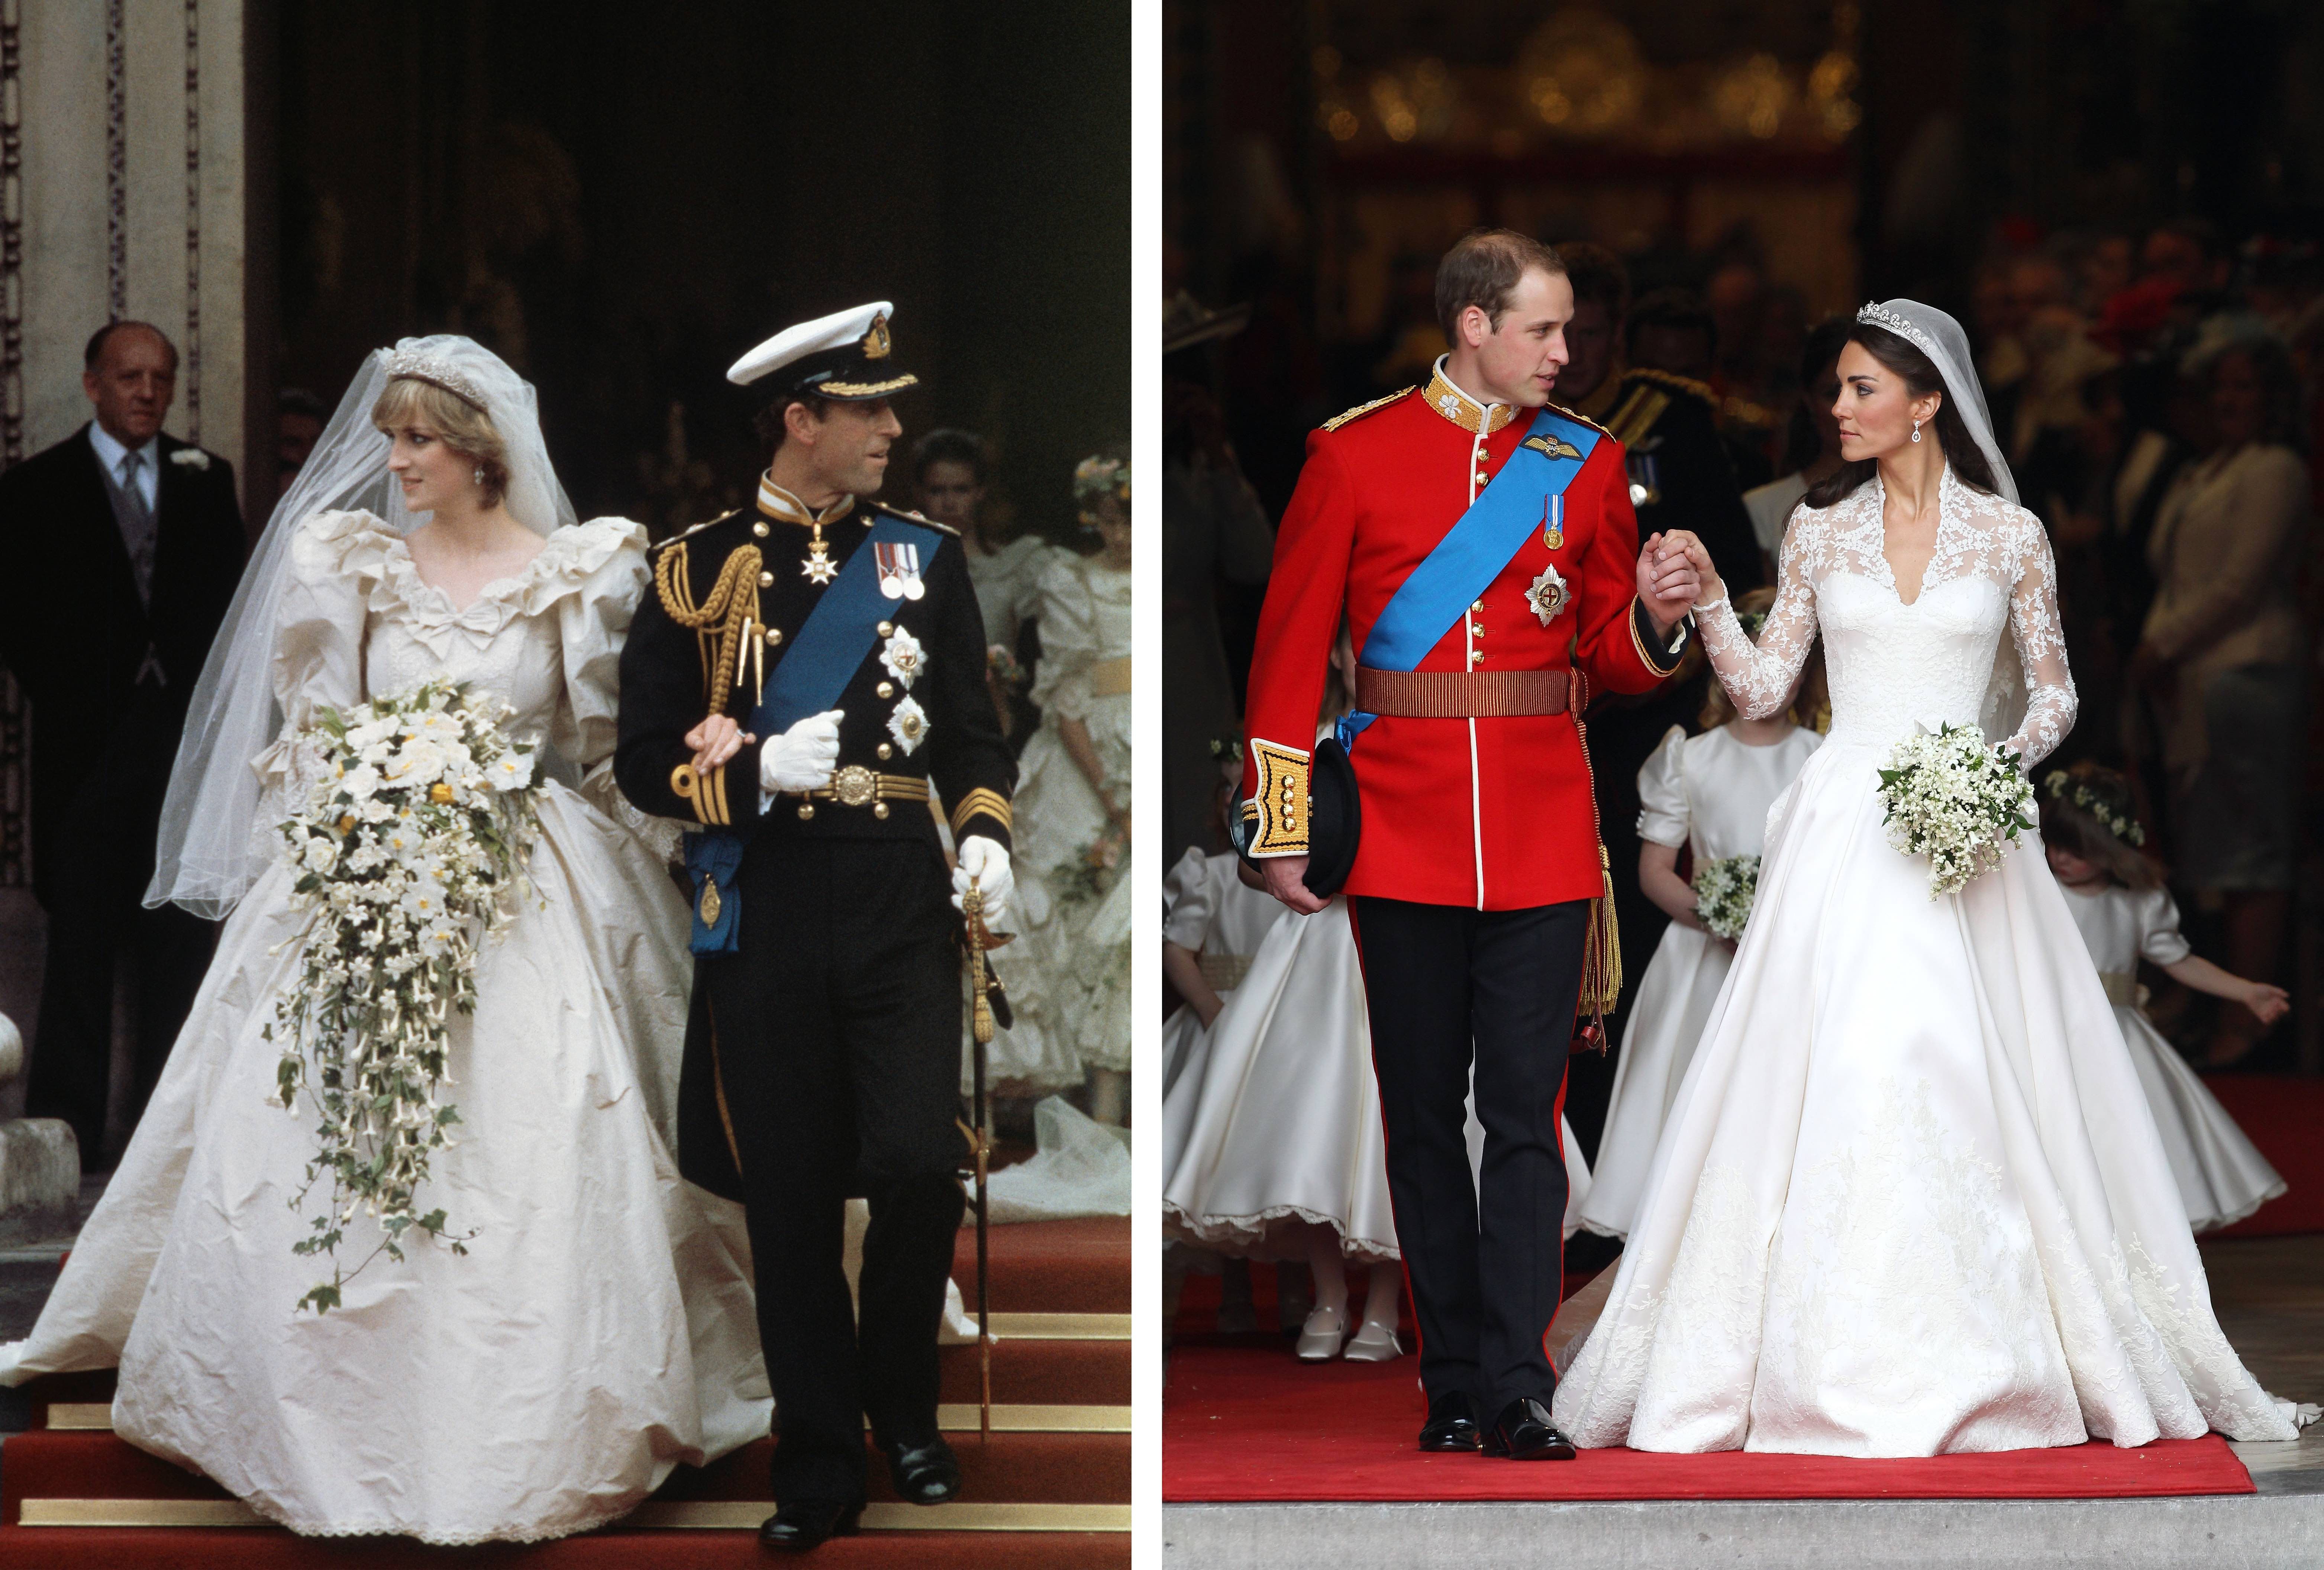 A look at strict rules for a royal wedding